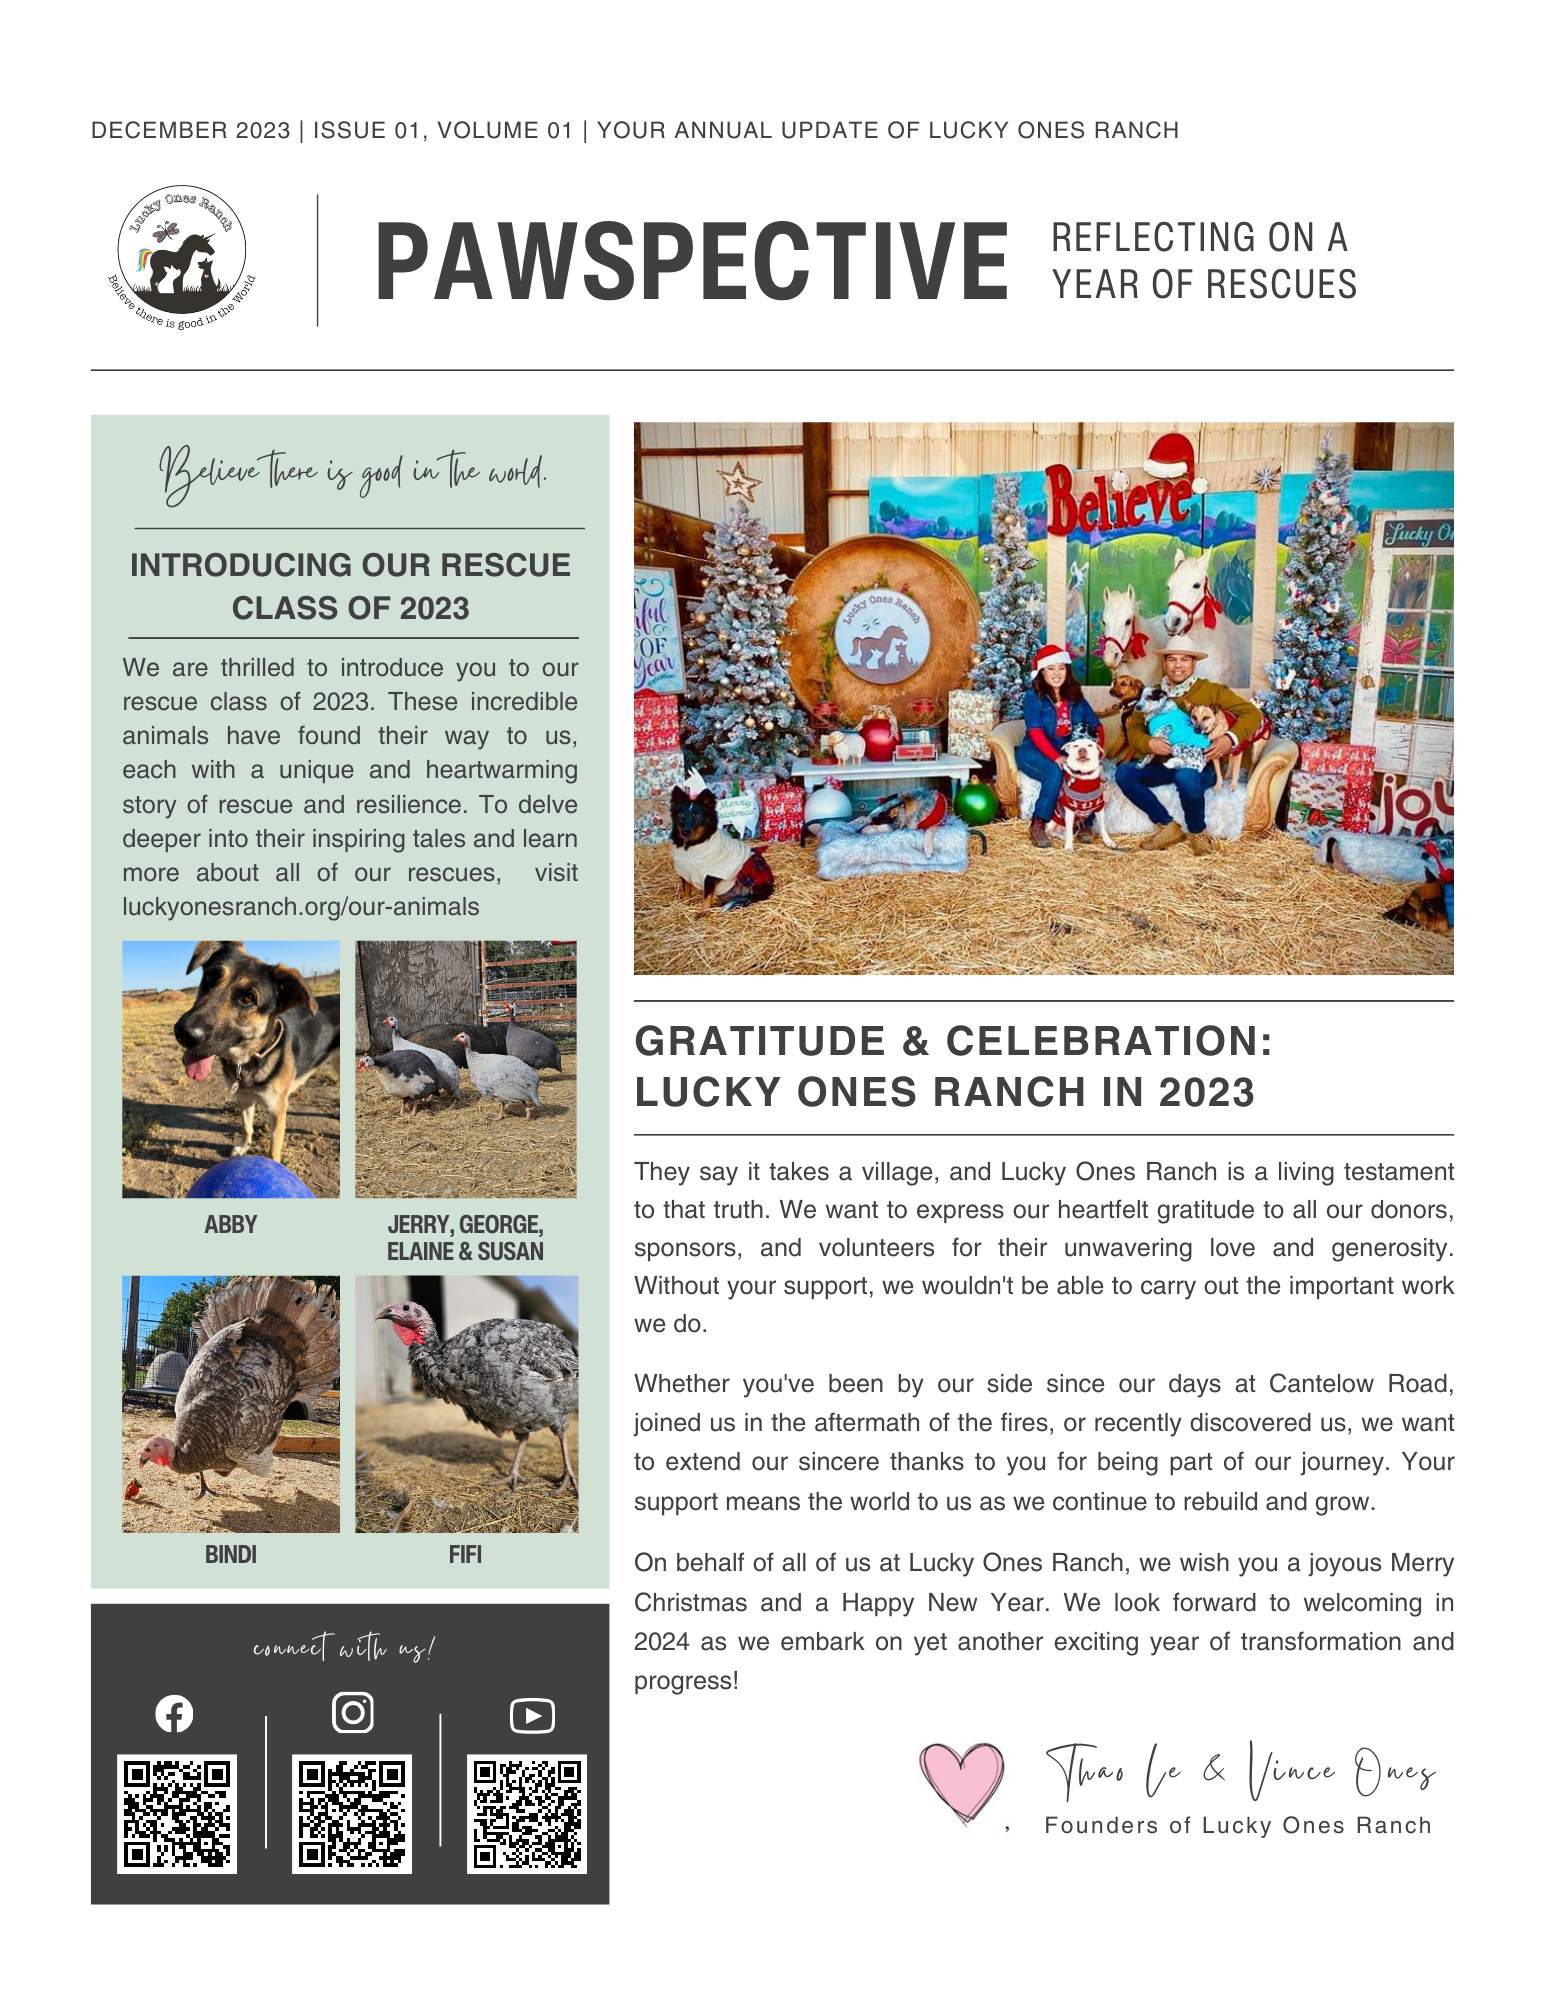 PAWSPECTIVE: A YEAR IN REVIEW